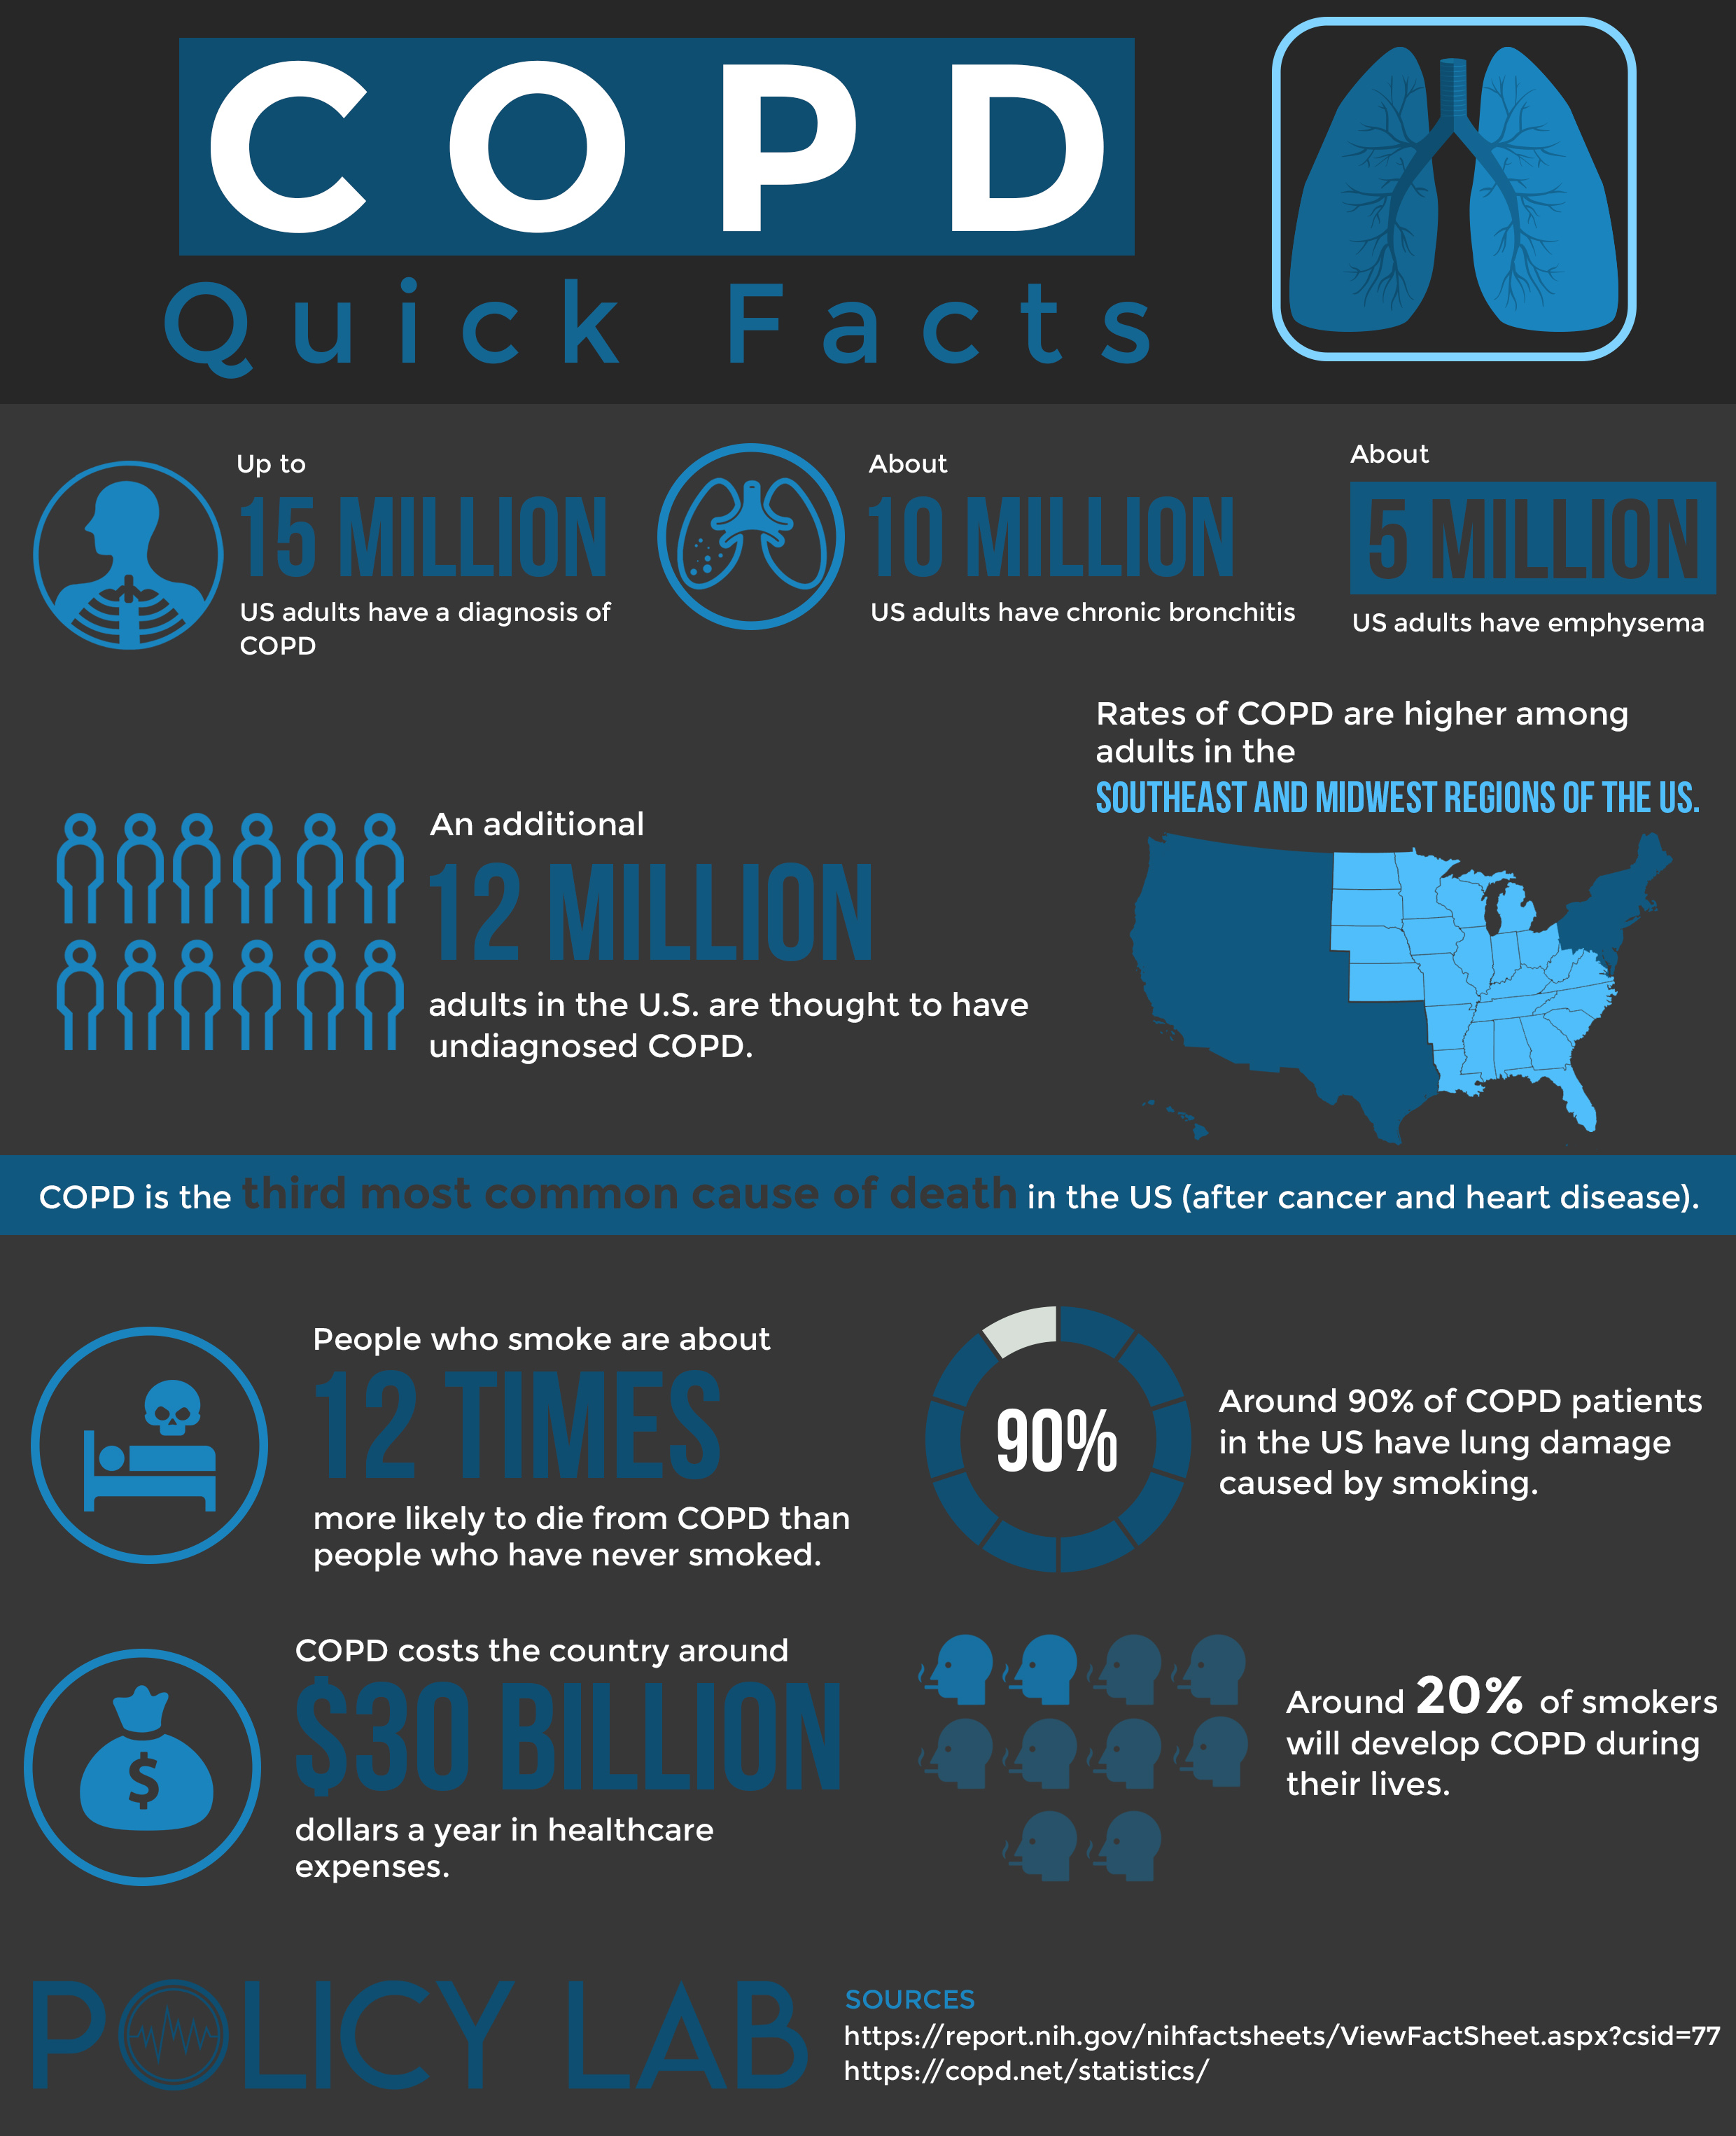 COPD Infographic Image and Quick Facts